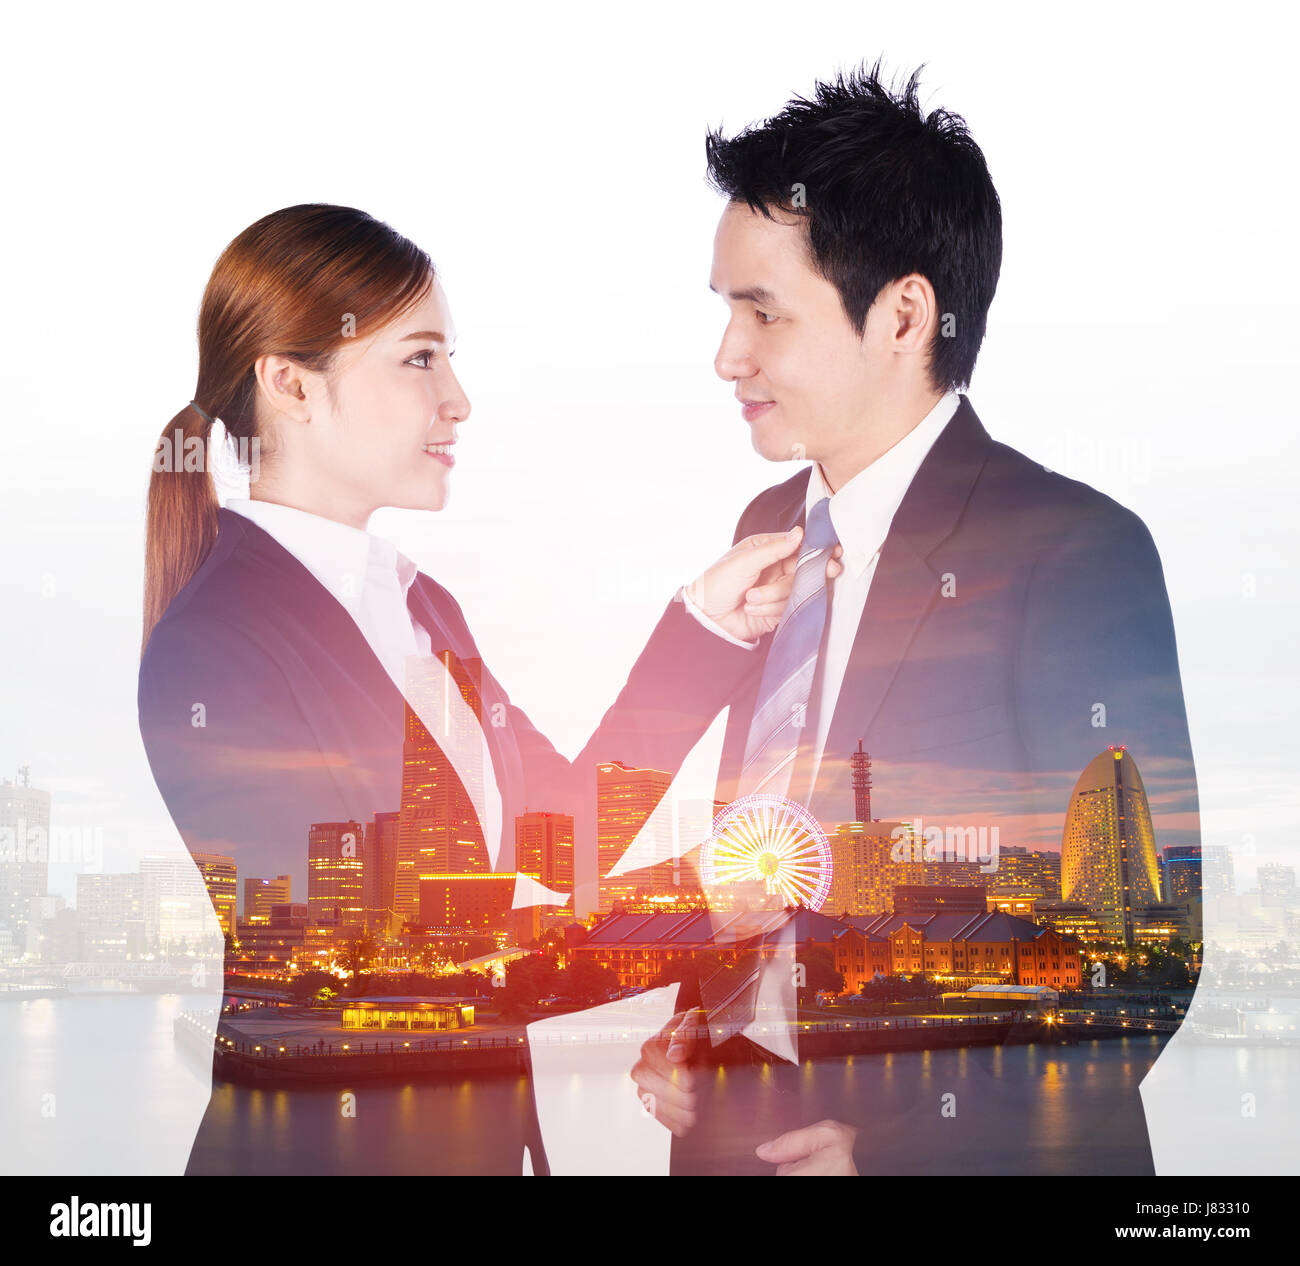 double exposure of business woman's hands adjusting neck tie of man in suit with a city background Stock Photo